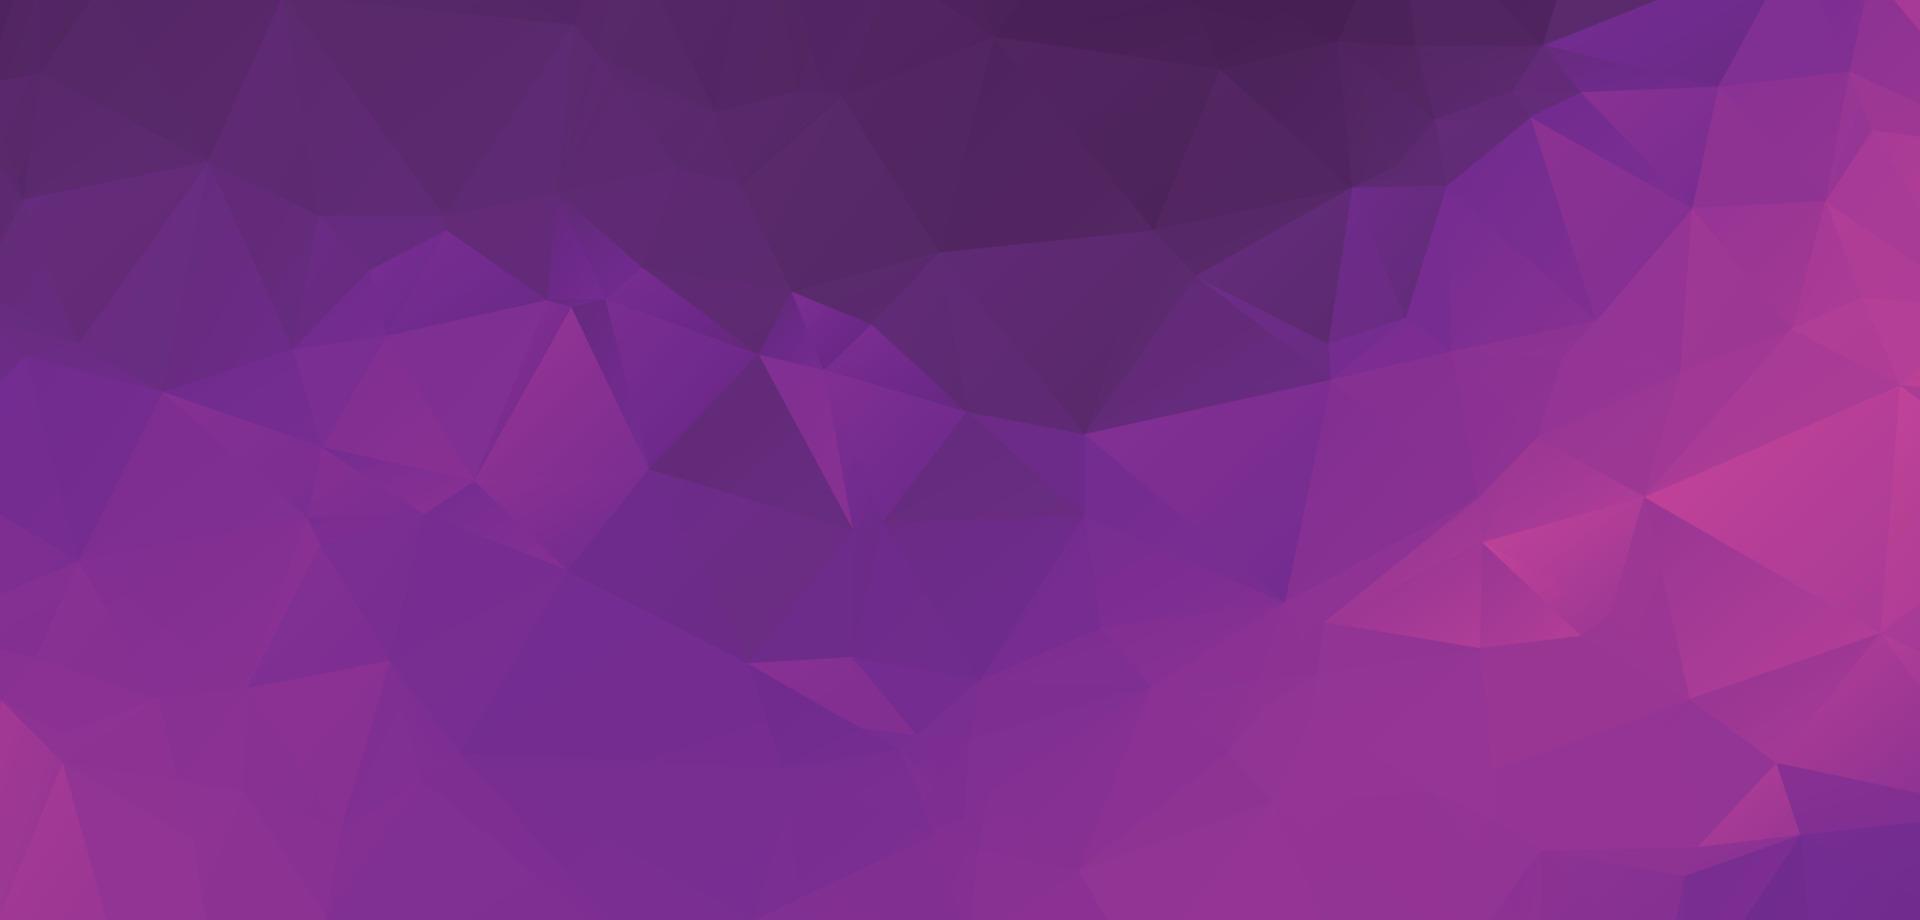 Purple Background Free vector download